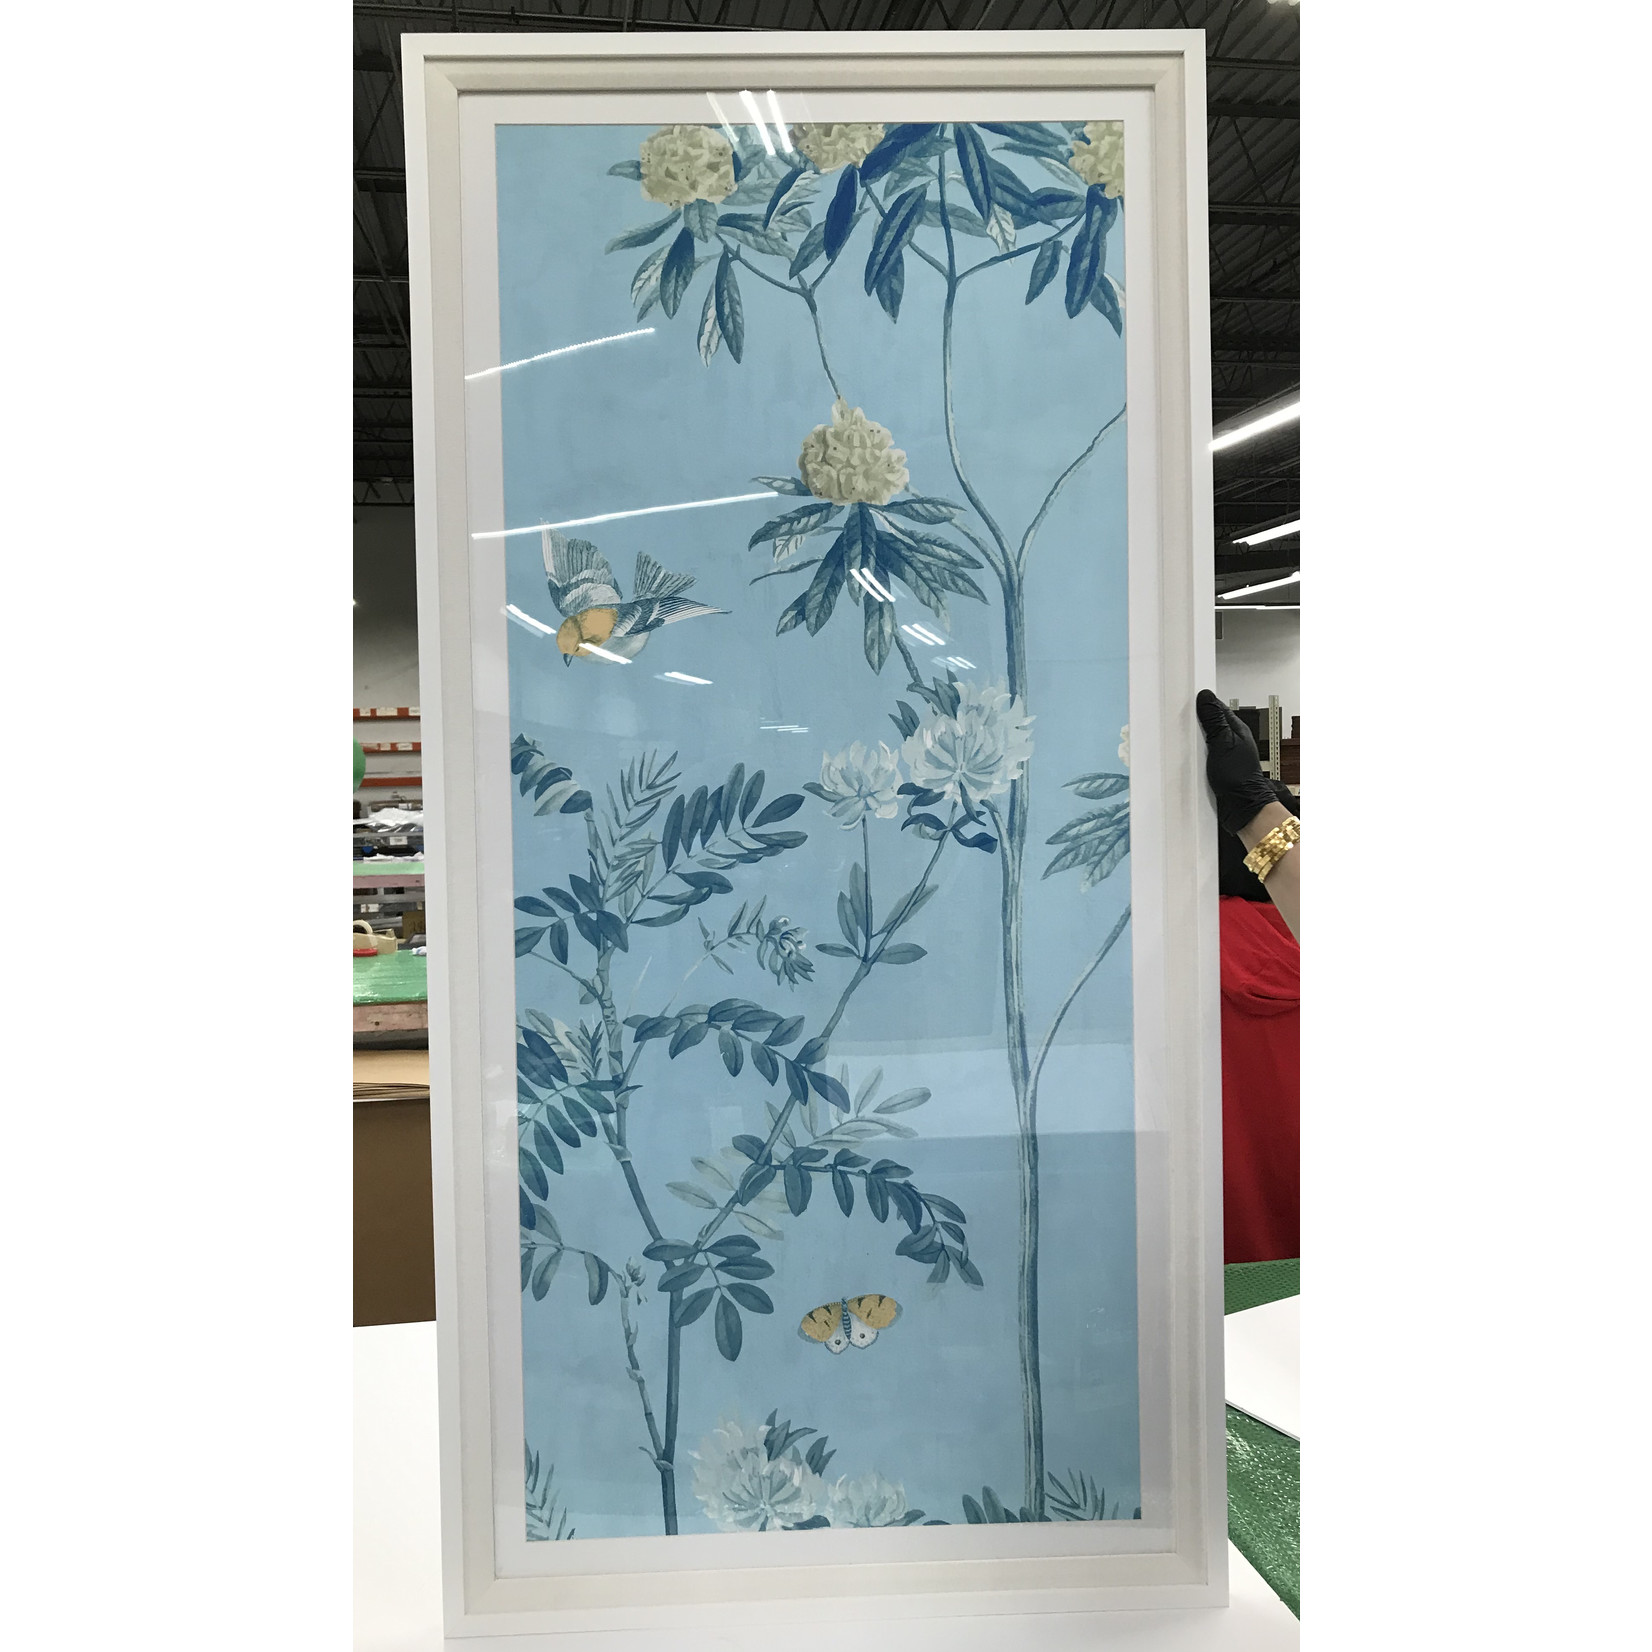 Framed Print on Rag Paper: Scenic Floral Triptych in Powder Blue with an off-white frame 25 x 50 inches each panel